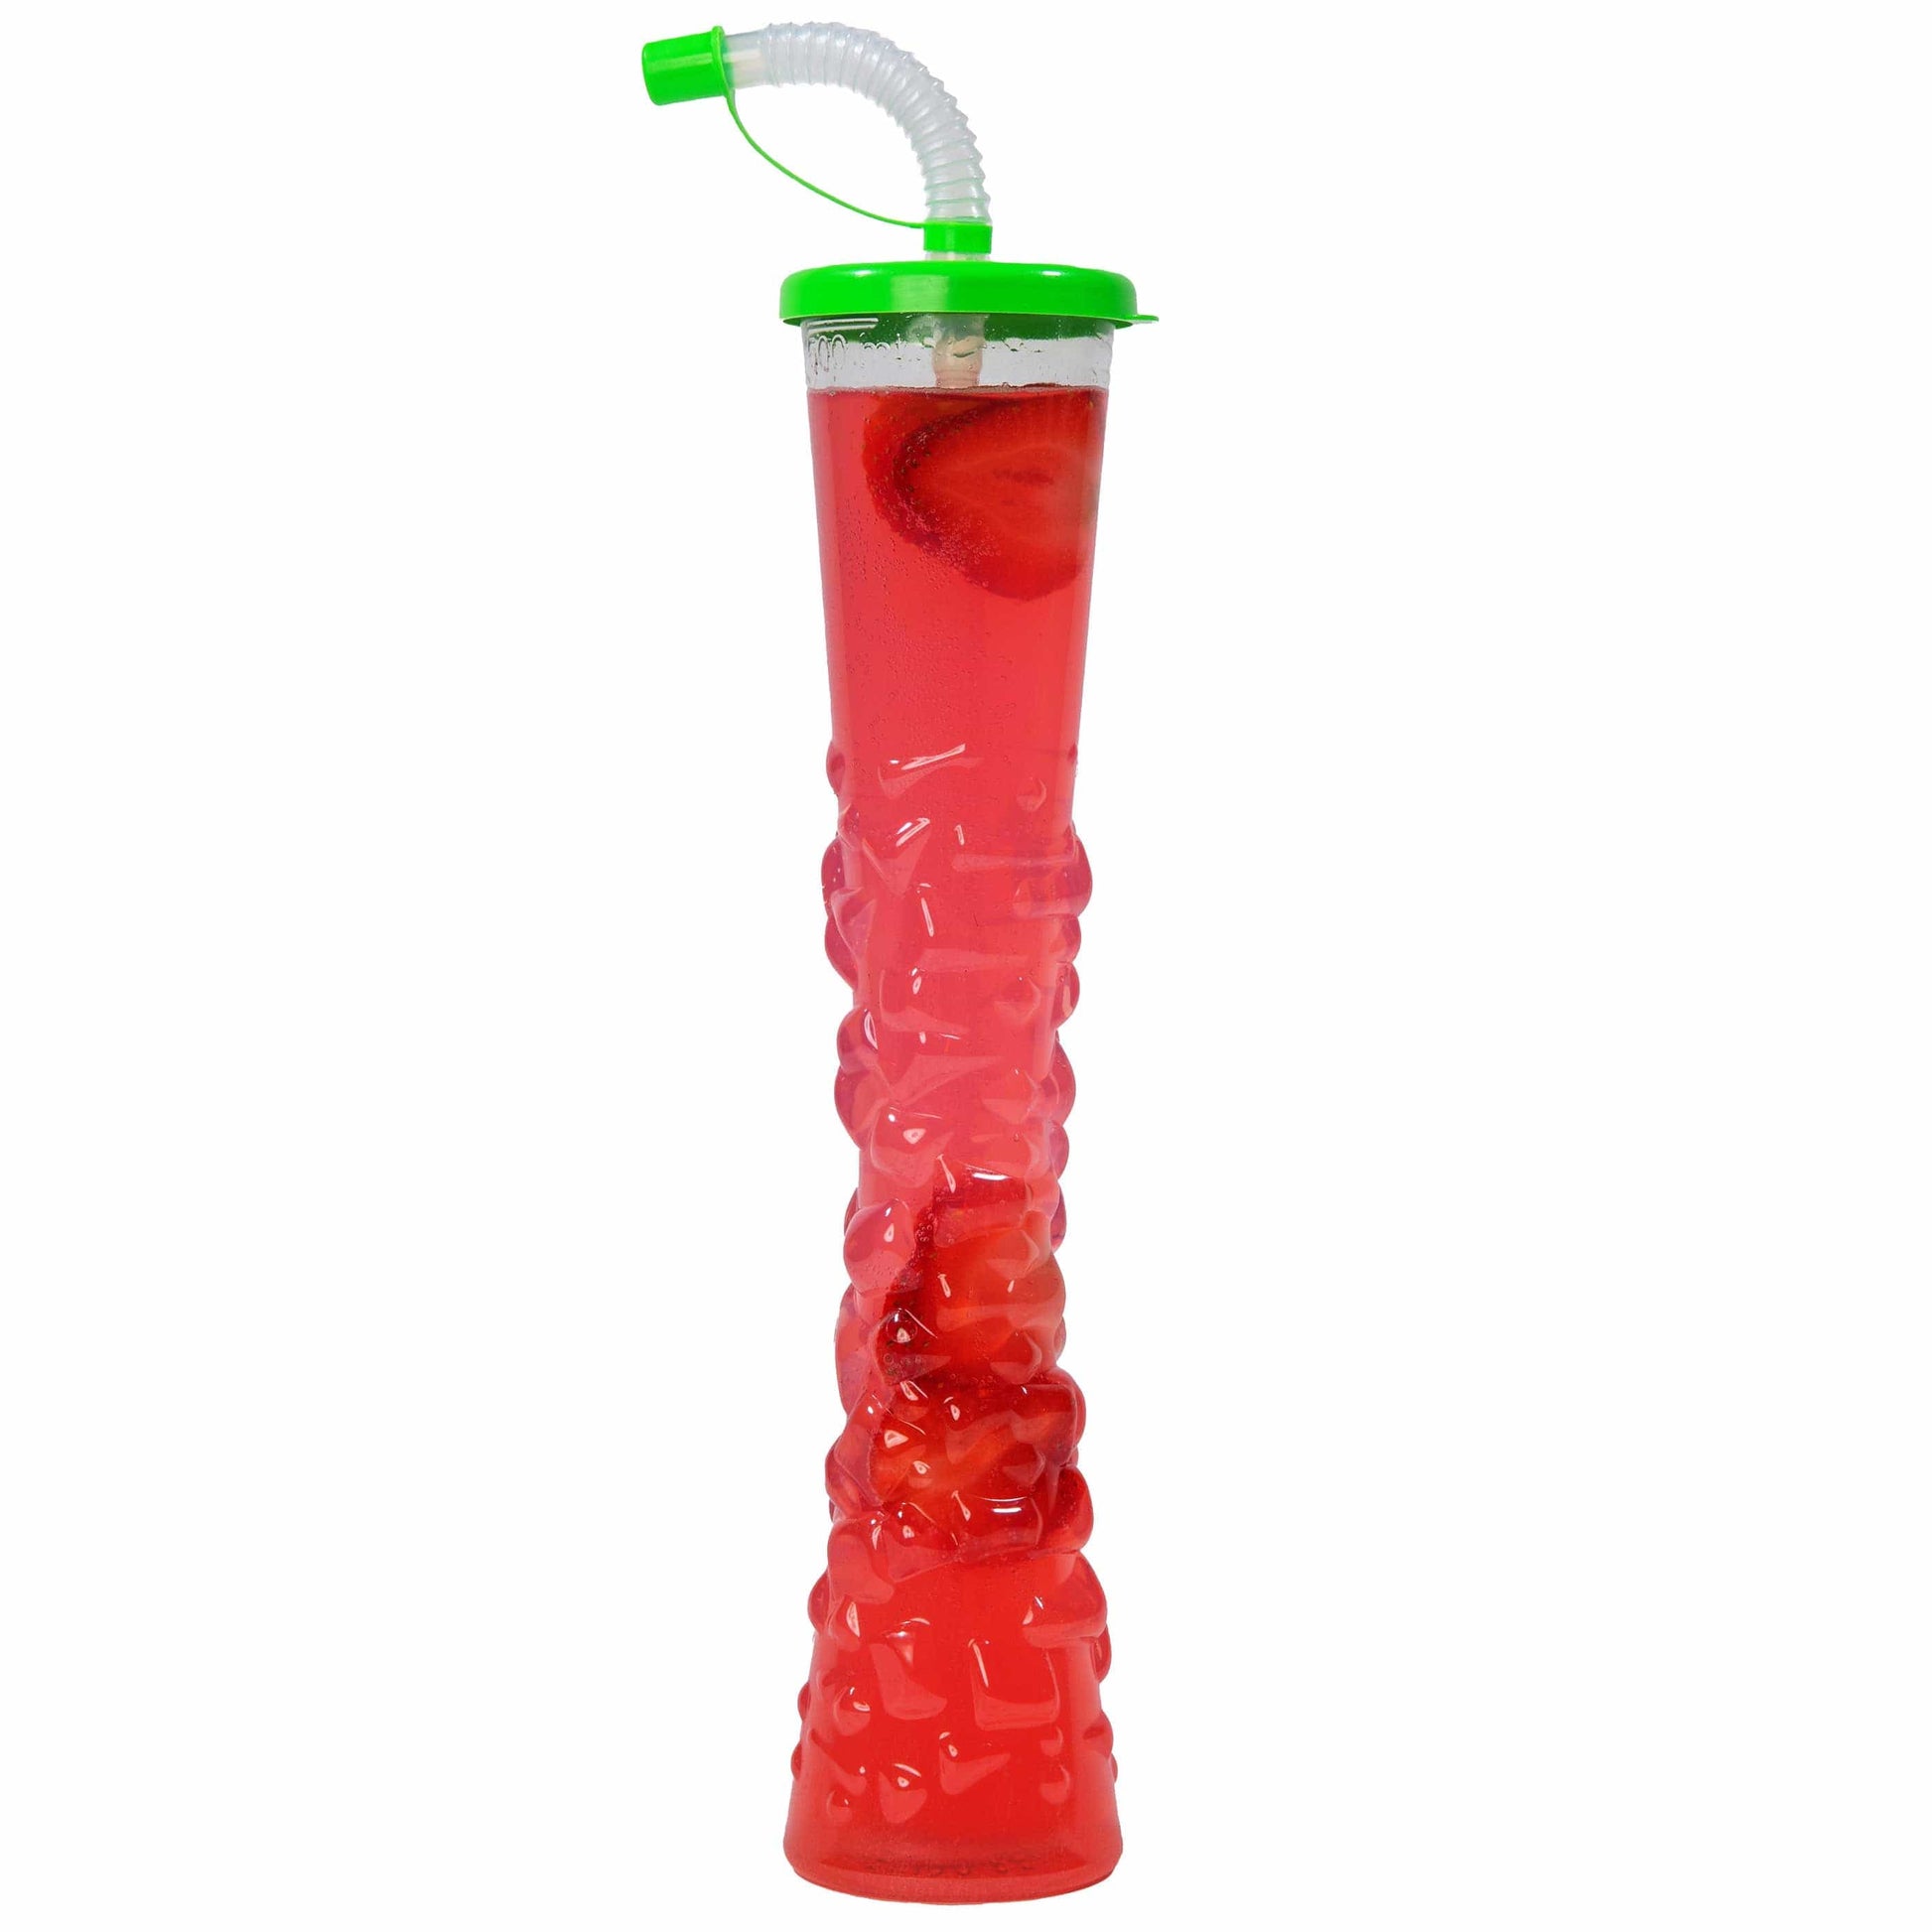 Sweet World USA Yard Cups Ice Yard Cups (54 Cups - Lime) - for Margaritas and Frozen Drinks, Kids Parties - 17oz. (500ml) cups with lids and straws